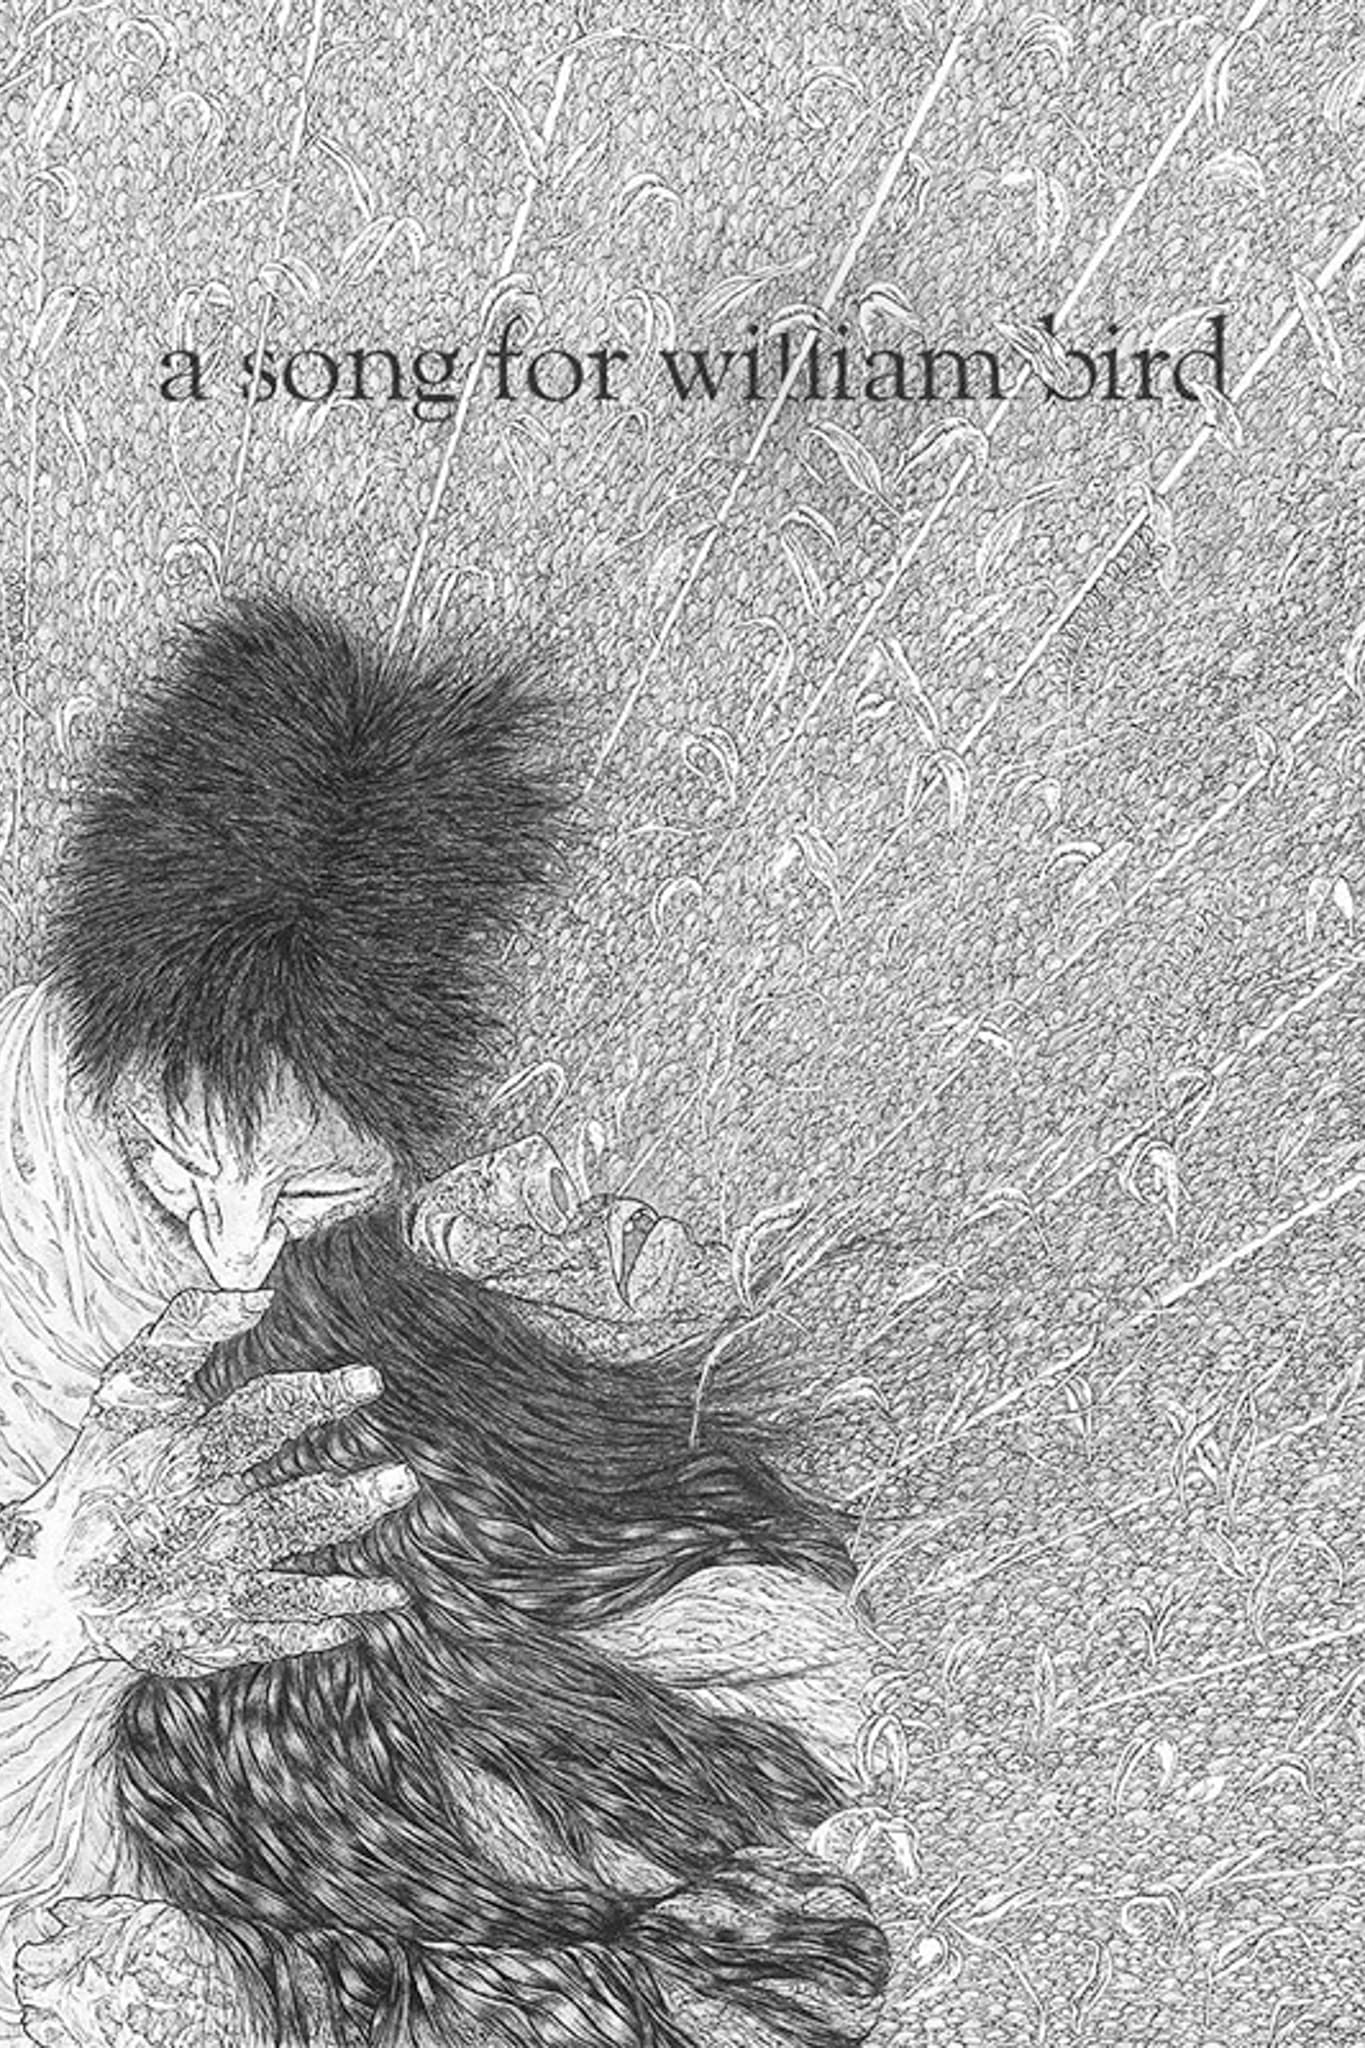 A Song For William Bird